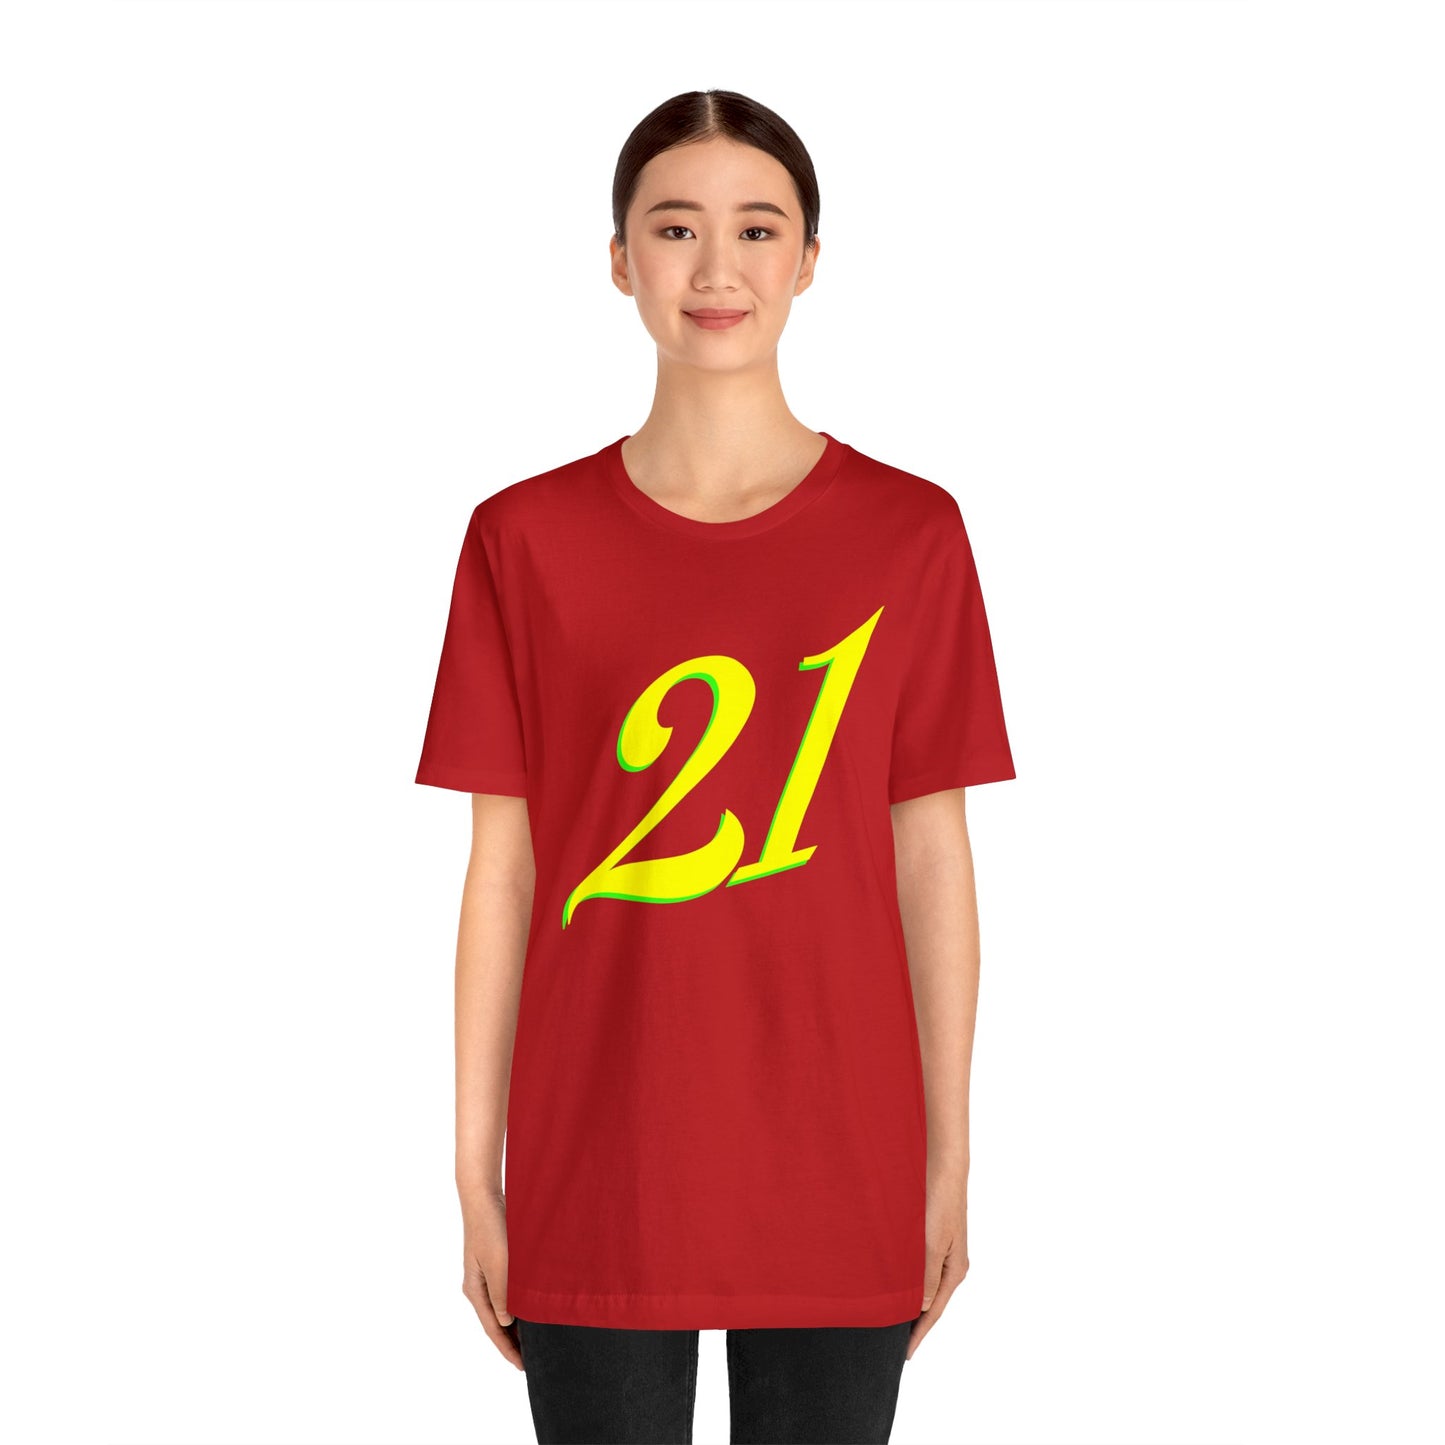 Number 21 Design - Soft Cotton Tee for birthdays and celebrations, Gift for friends and family, Multiple Options by clothezy.com in Asphalt Size Medium - Buy Now